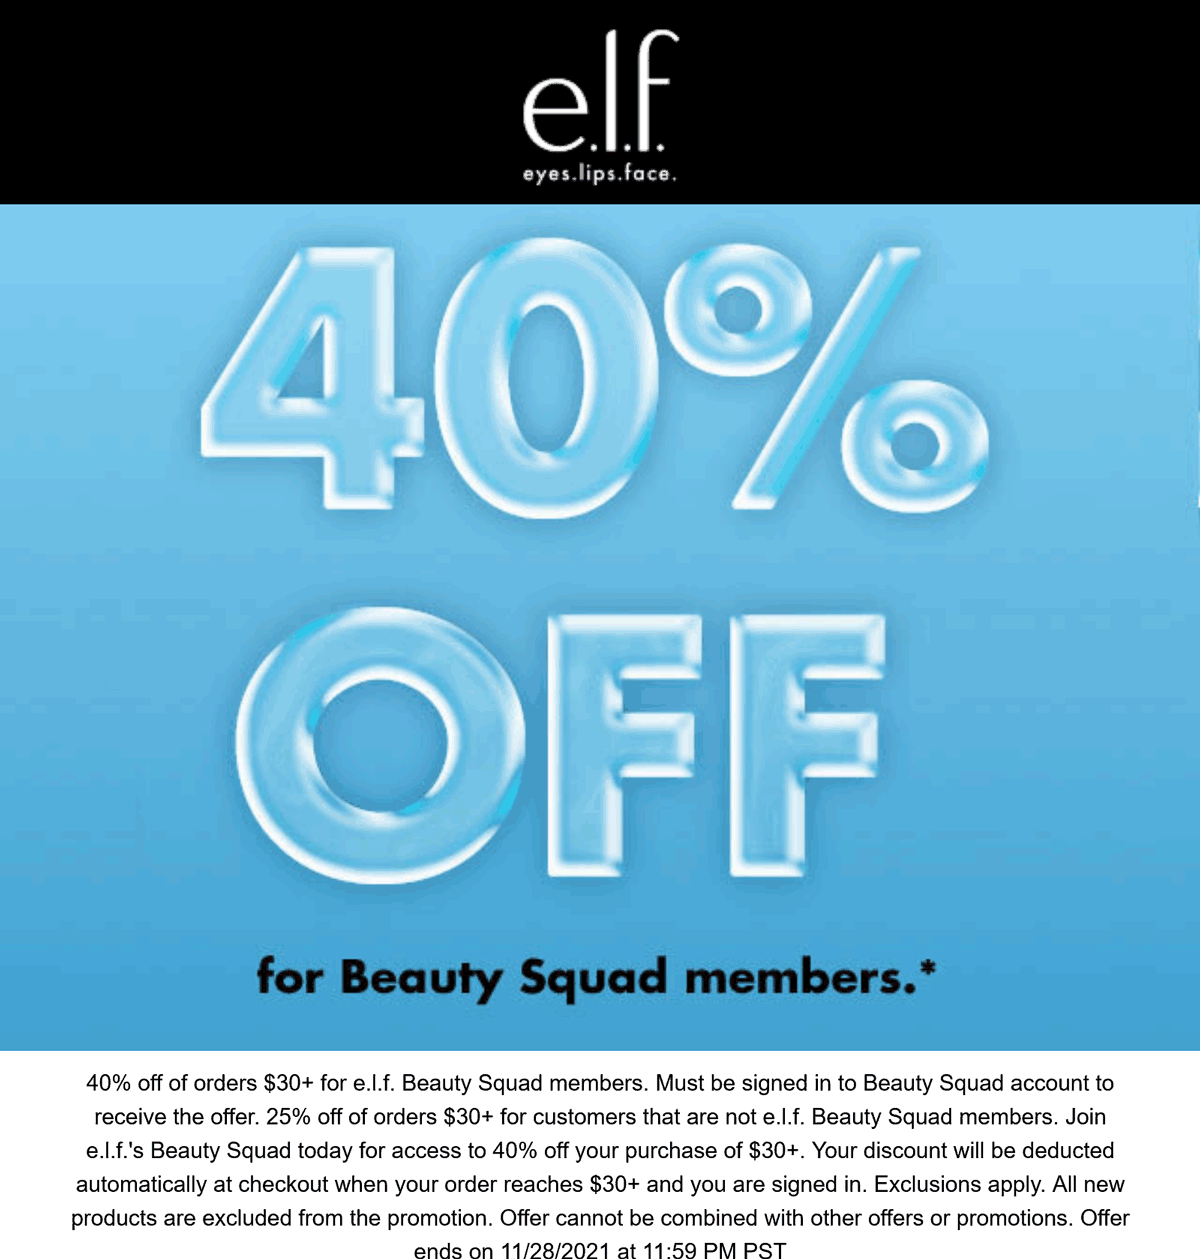 e.l.f. Cosmetics coupons & promo code for [January 2022]